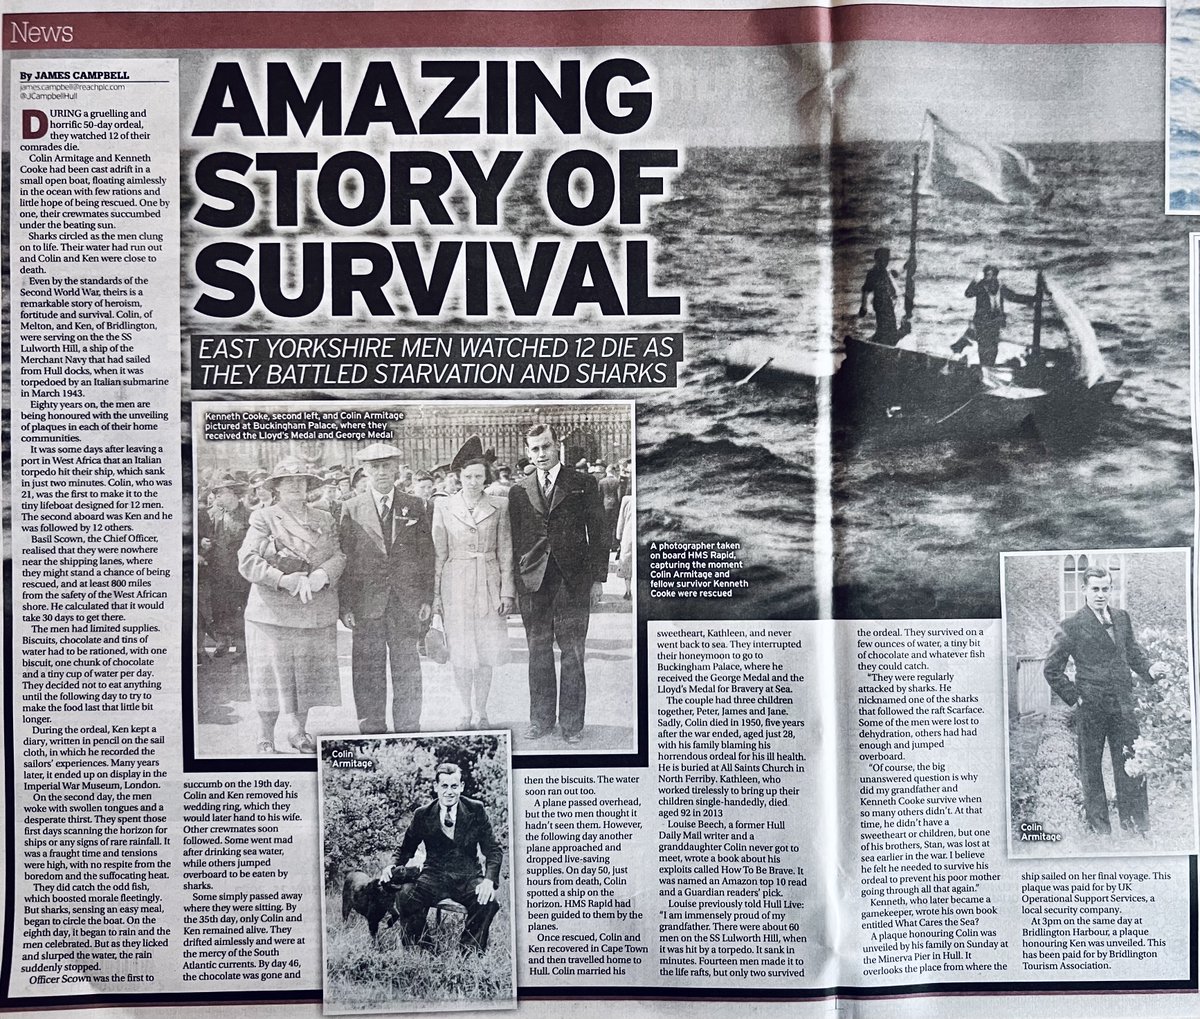 Eighty-one years ago the ship carrying my grandad sank, beginning a 50-day sea ordeal that inspired my debut novel #HowToBeBrave. His courage also saved my daughter's life when we shared his tale in exchange for injections. Watch this space for news of something theatrical...